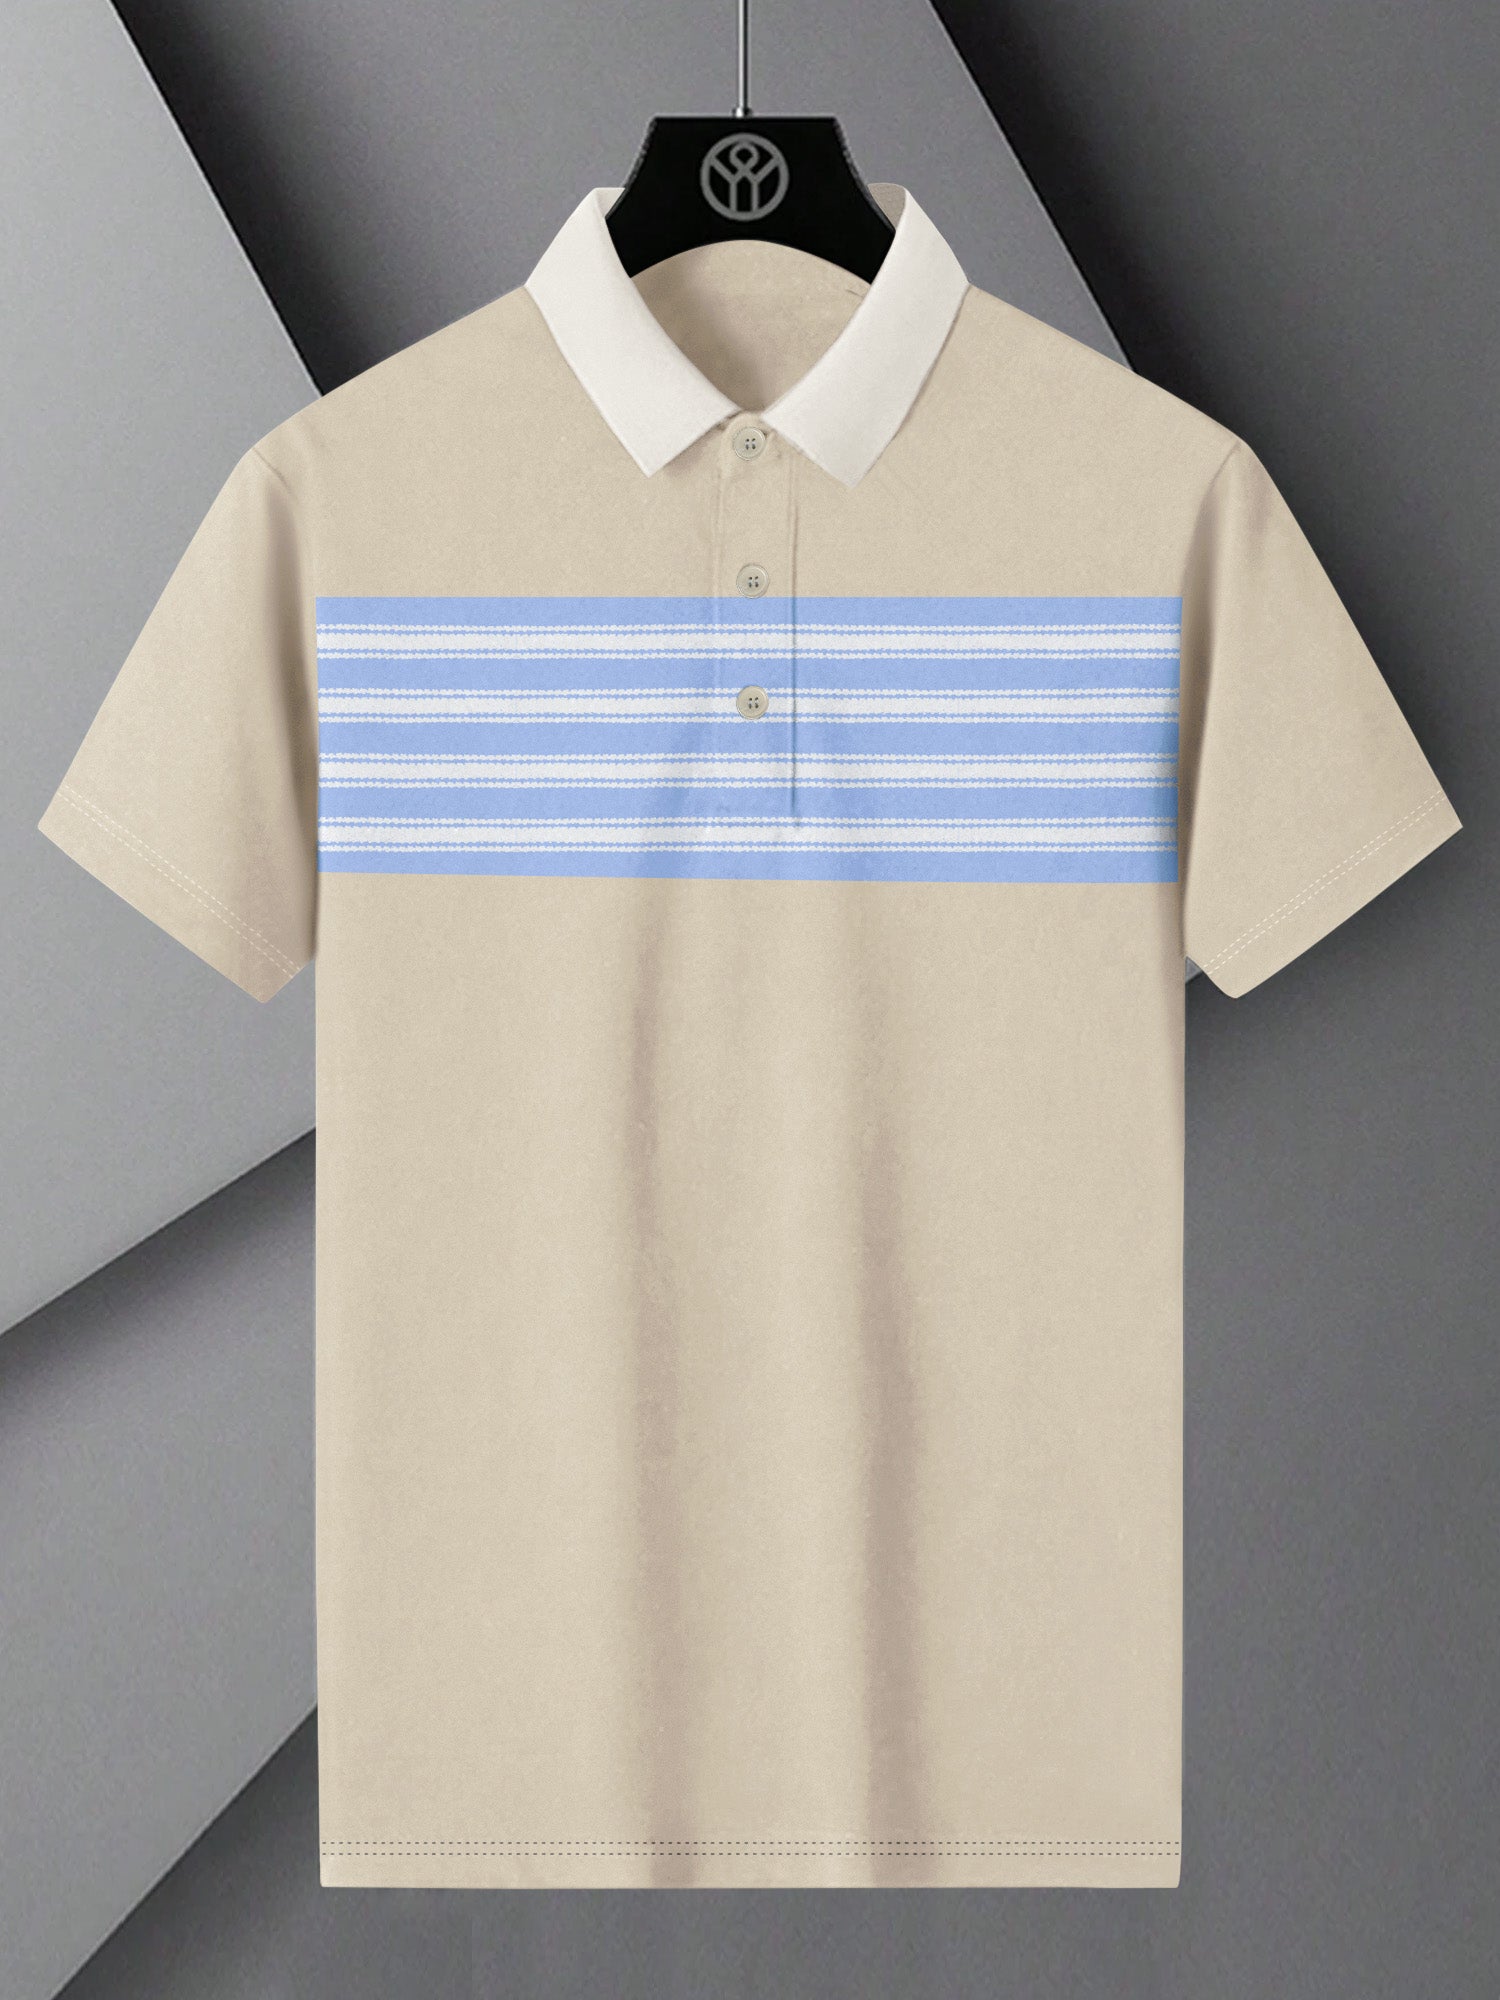 NXT Summer Polo Shirt For Men-Skin with Sky Stripe-BE709/BR12962